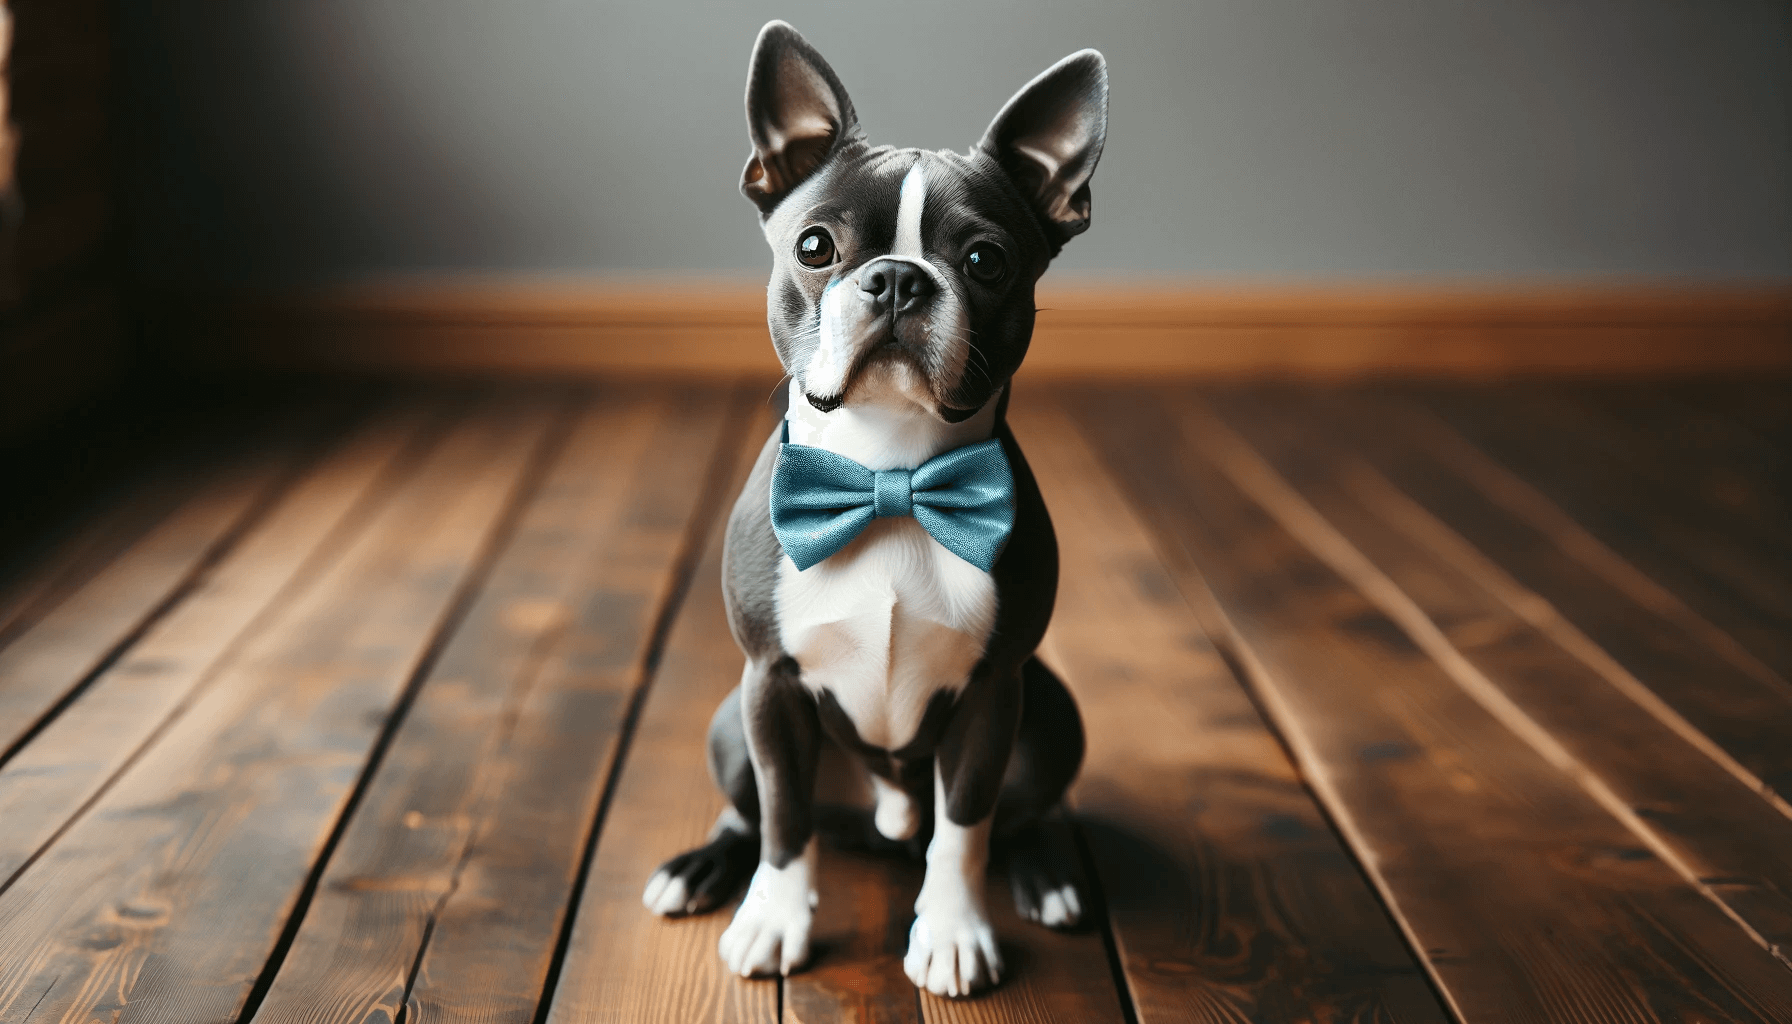 A stylish Blue Boston Terrier with a charming bow tie sits attentively on a wooden floor, showcasing the breed's friendly demeanor and stylish appearance.